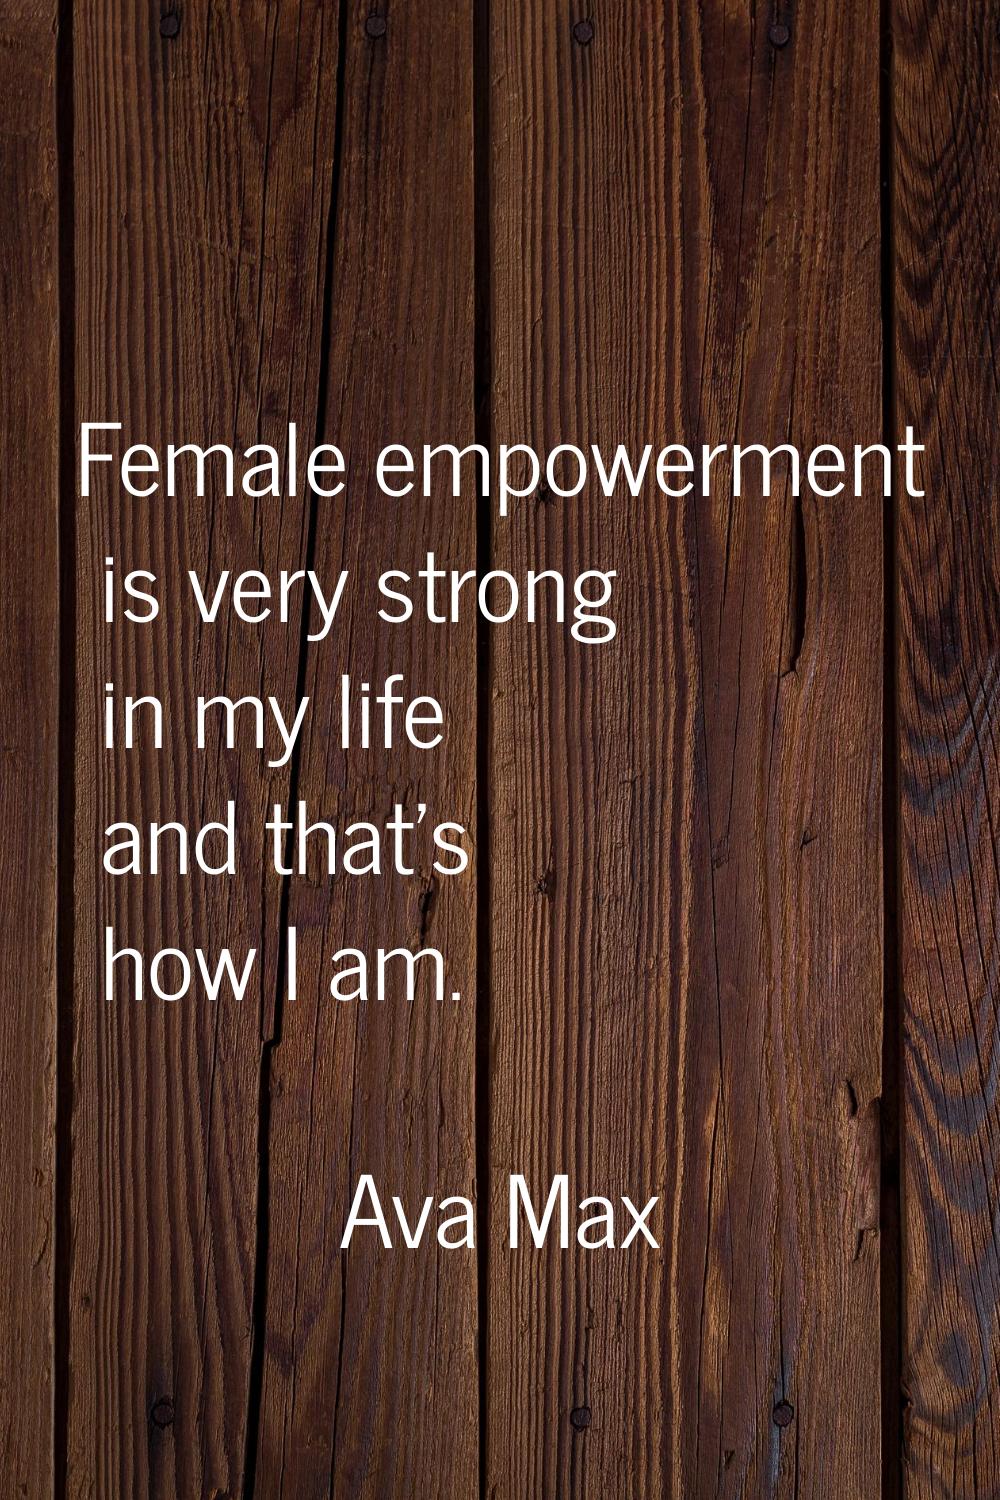 Female empowerment is very strong in my life and that's how I am.